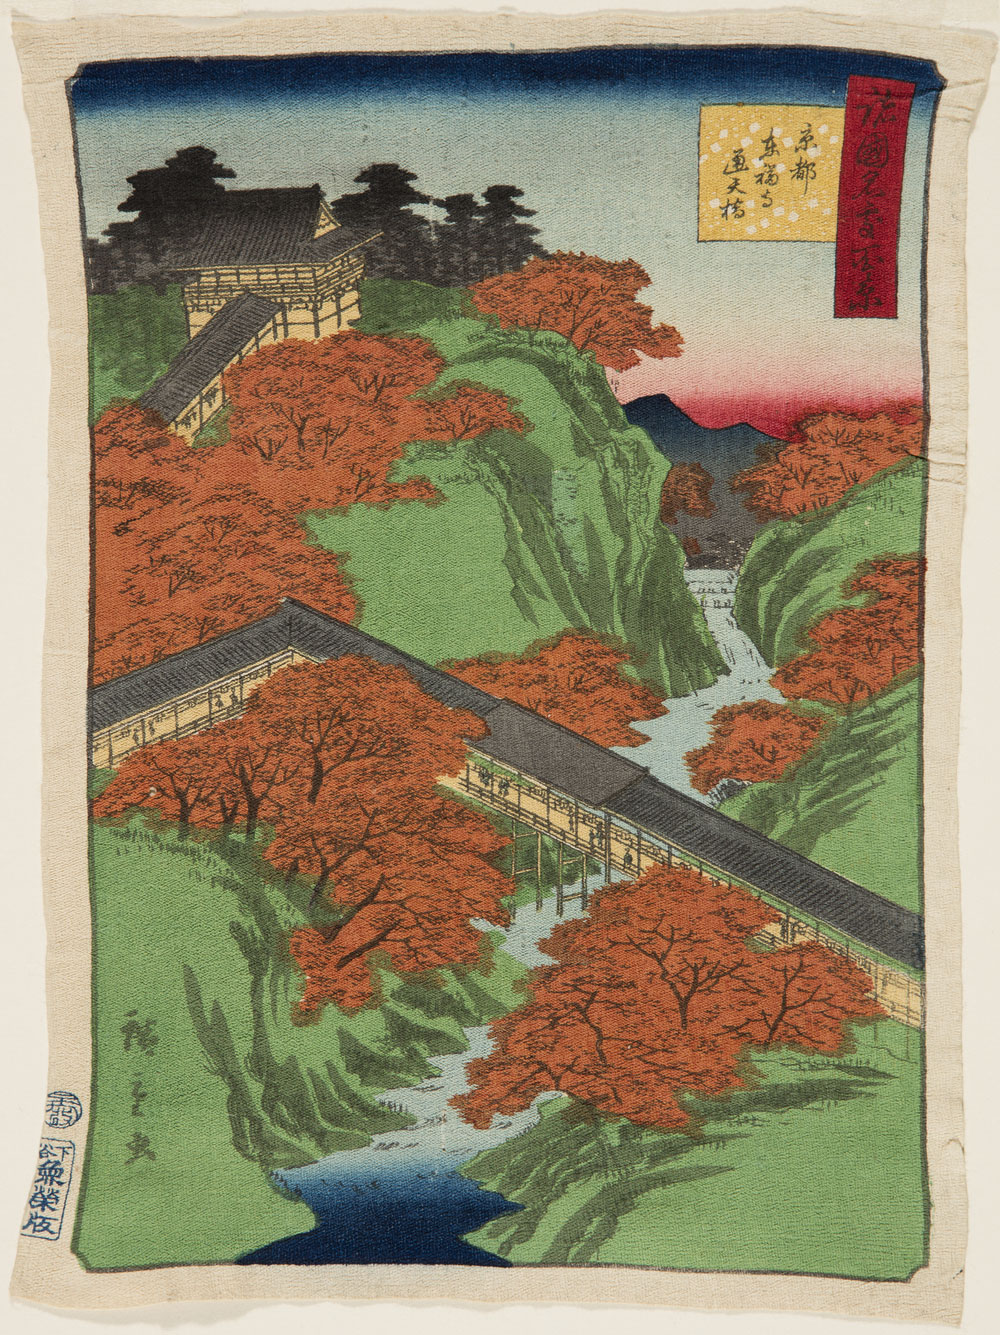 Japanese print of an aerial view of a landscape, a long covered walkway crosses a river and leads up a hill to a building.